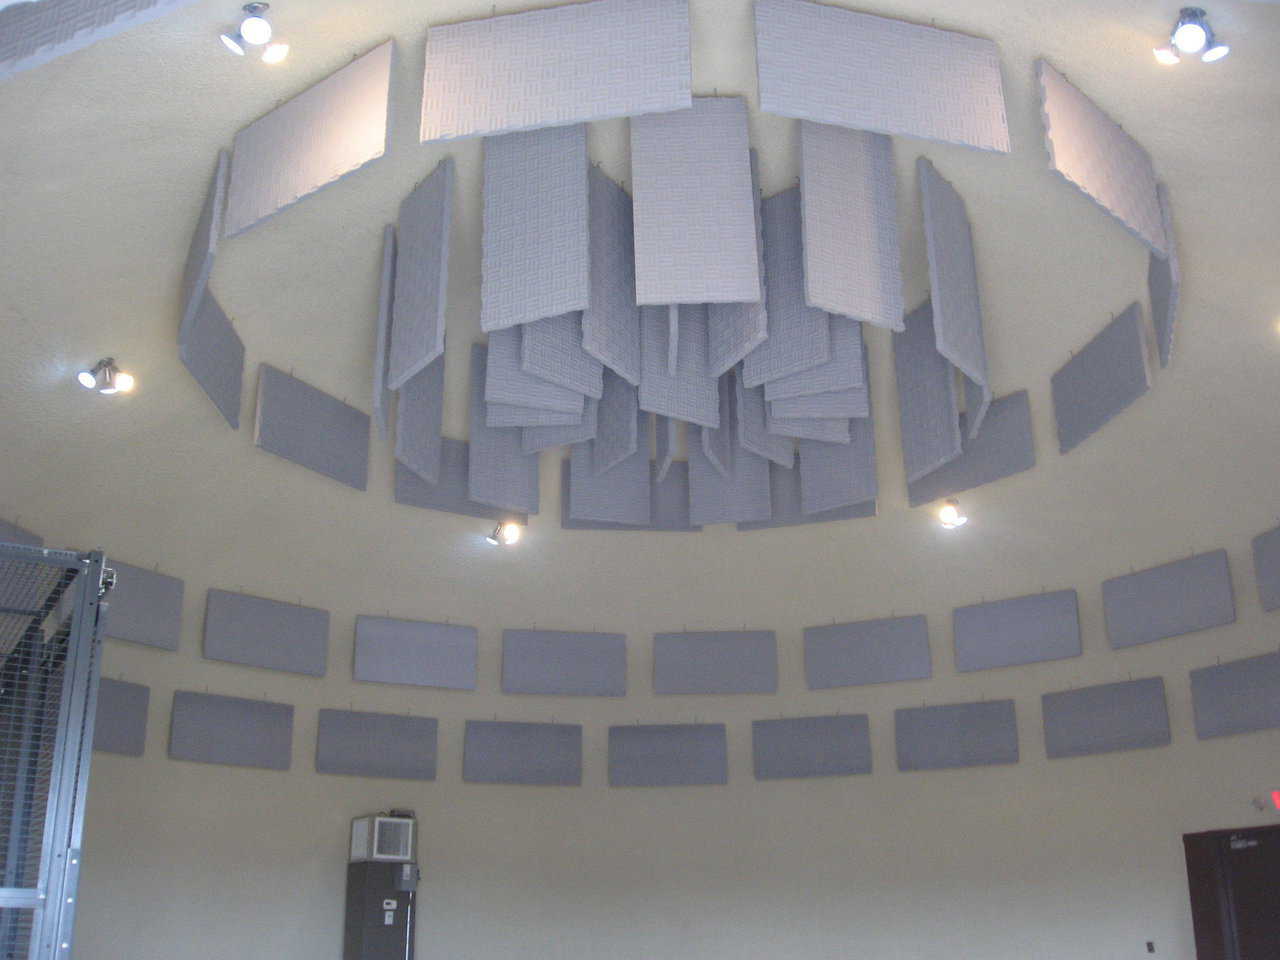 On its interior, the Headquarters Office dome has sound damper panels.